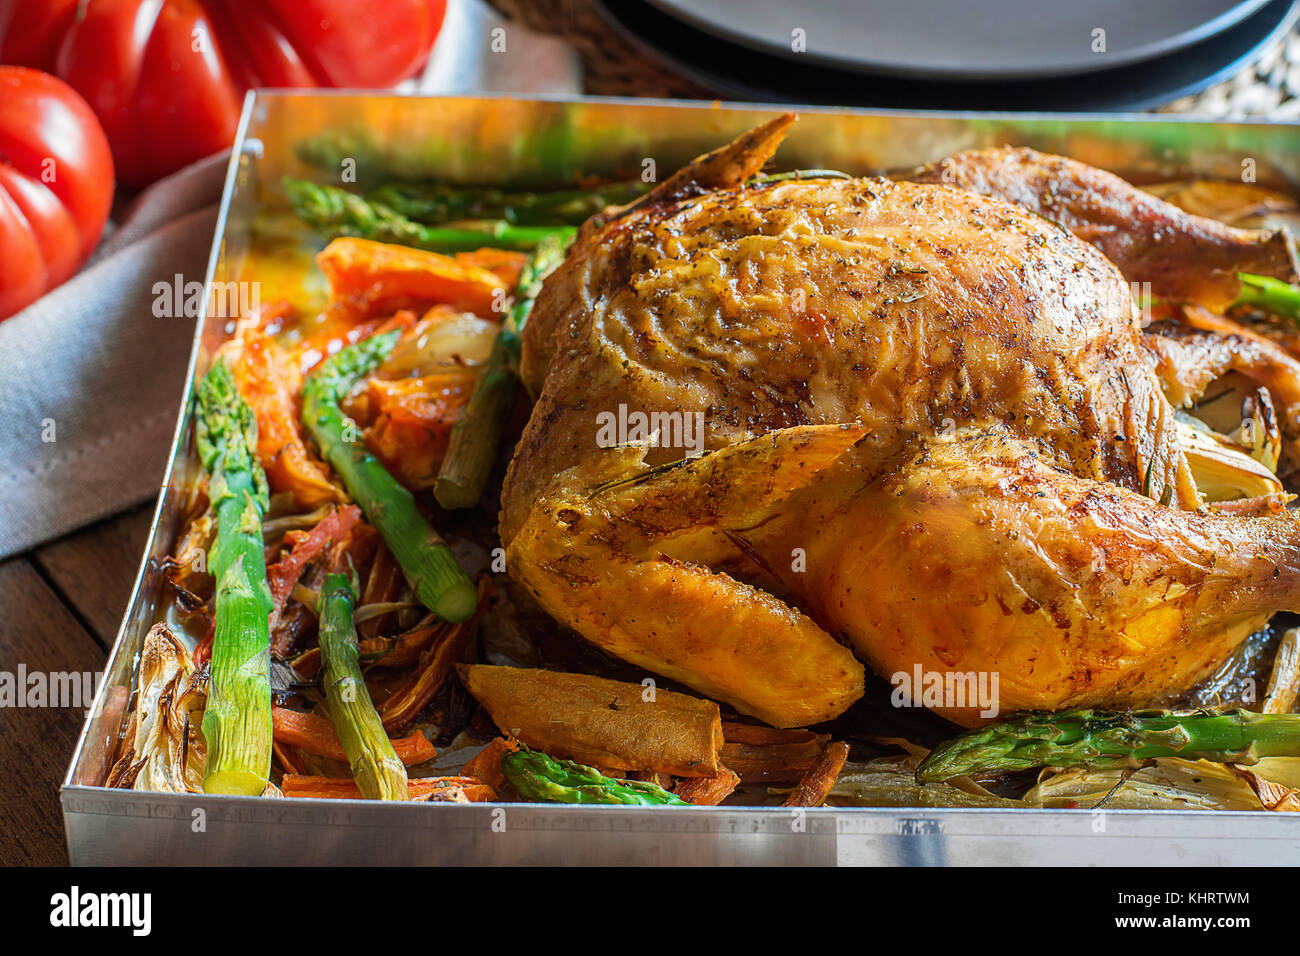 Homemade Roasted Stuffed Chicken Vegetables in Baking Form Yams Carrots Asparagus Onions Herbs Rosemary Thyme Golden Crust Festive Dinner Dish Christm Stock Photo